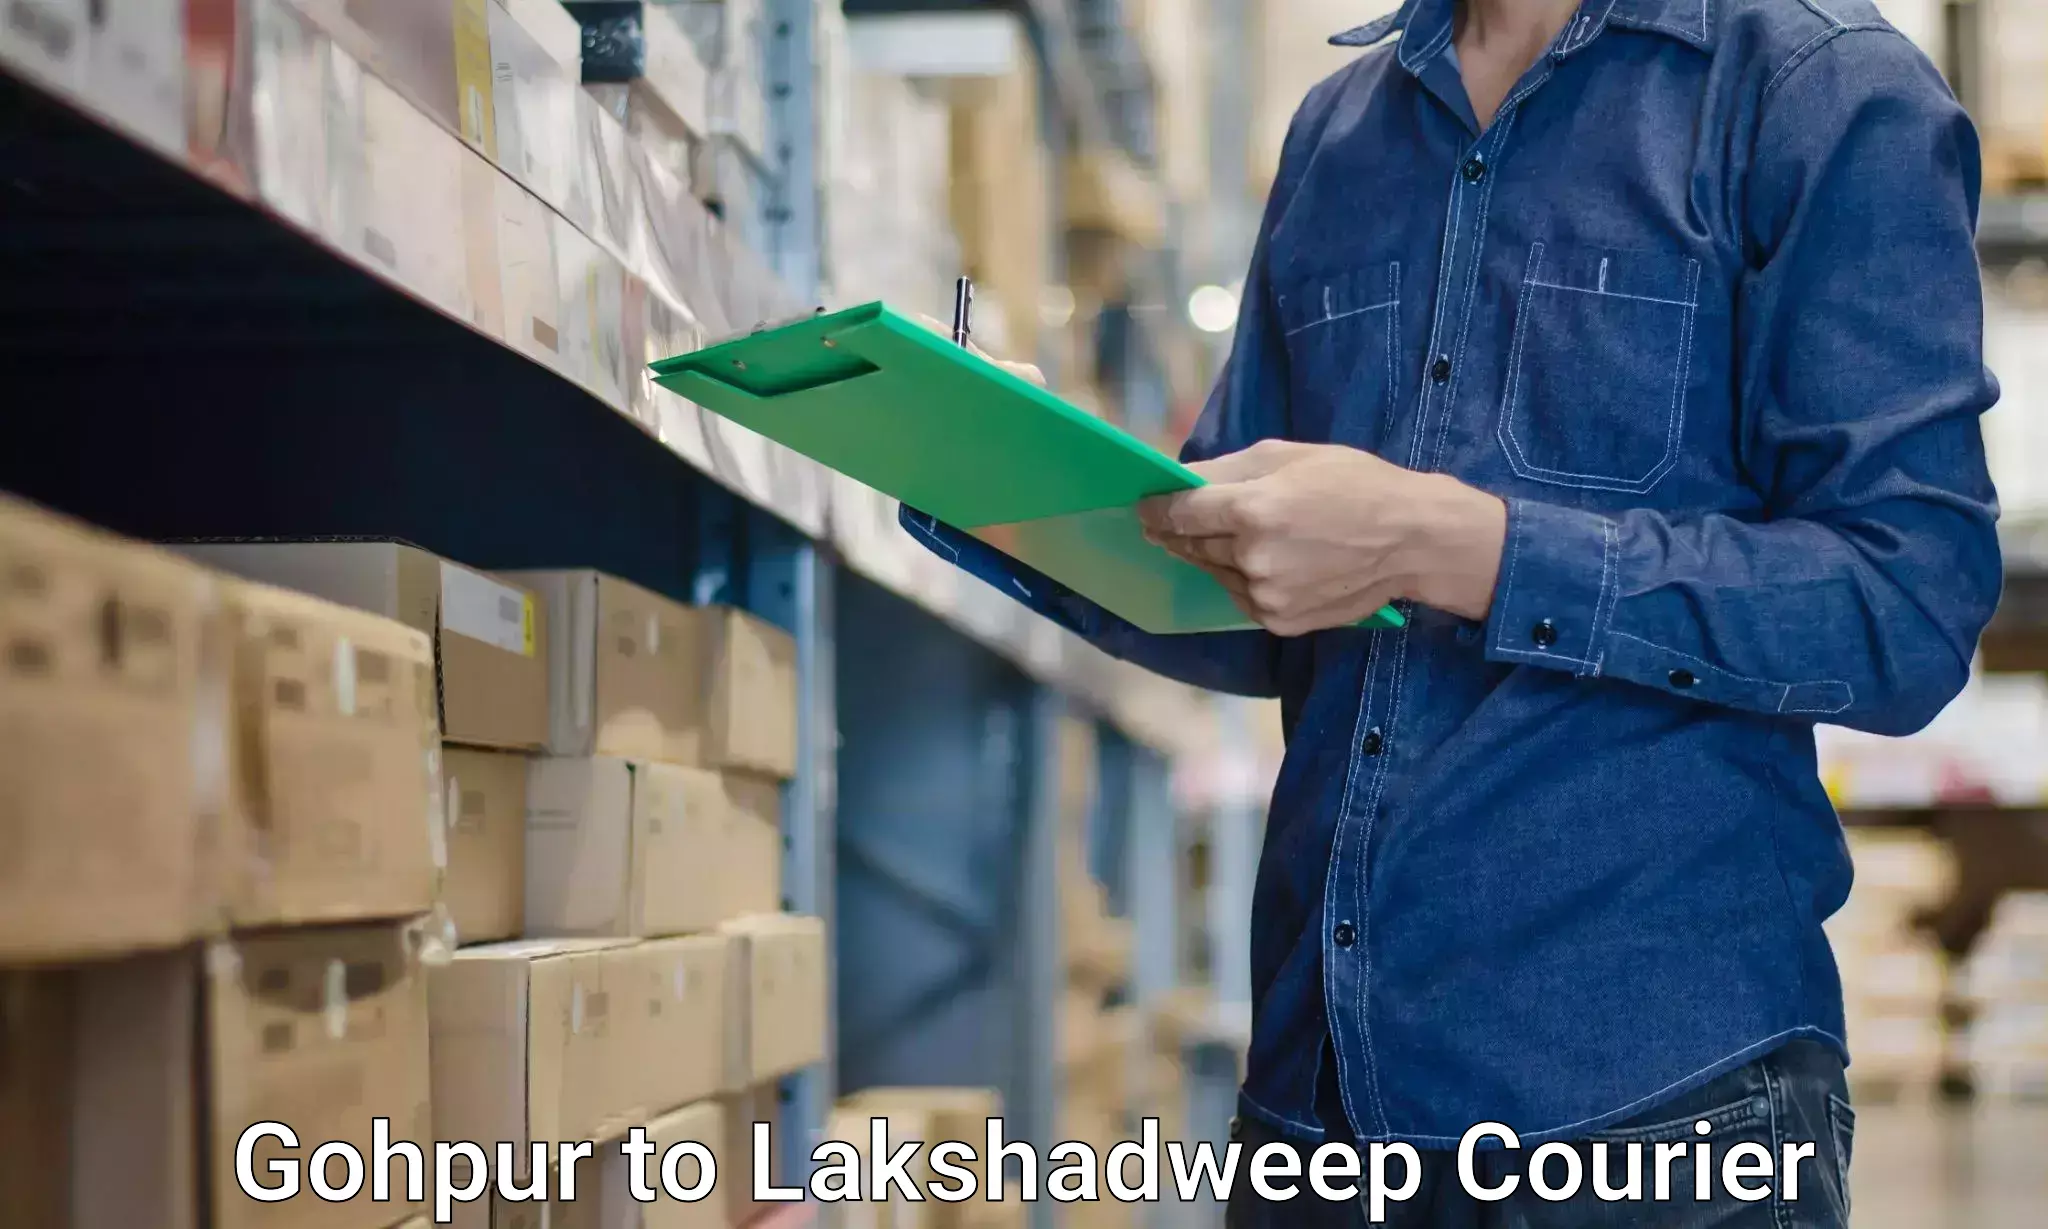 Furniture transport specialists Gohpur to Lakshadweep